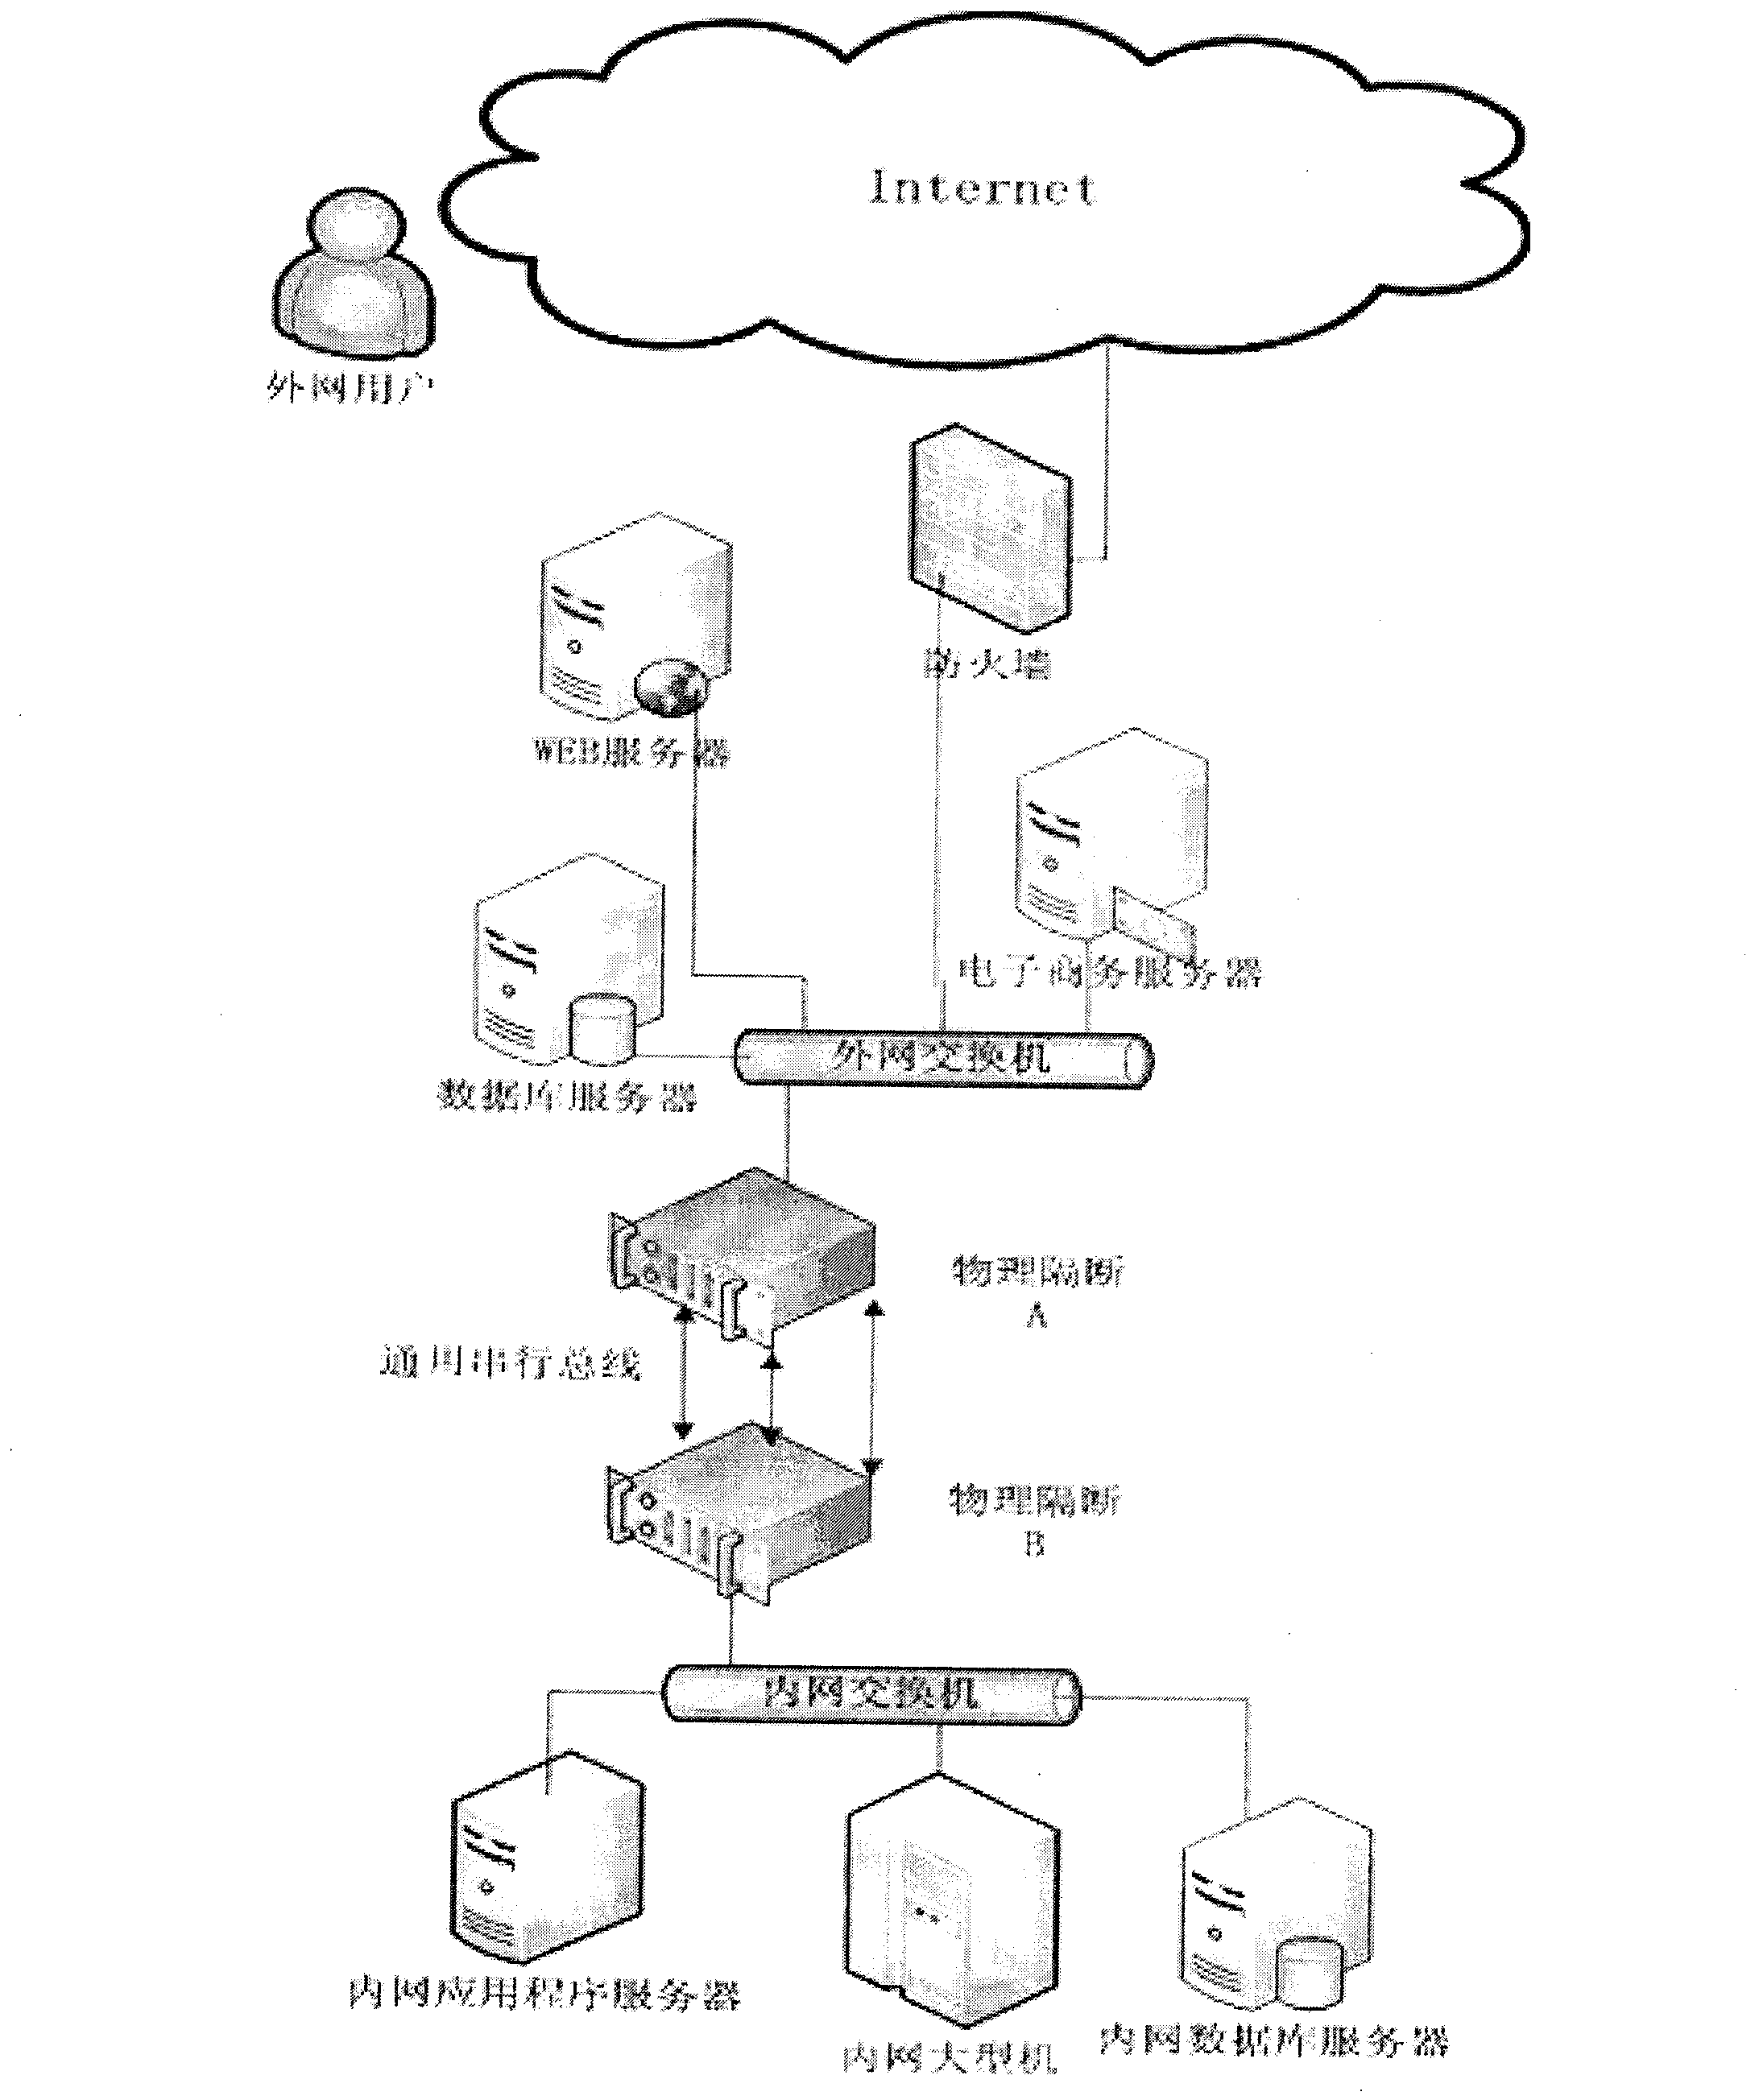 Device for realizing physical partition of internal and external networks